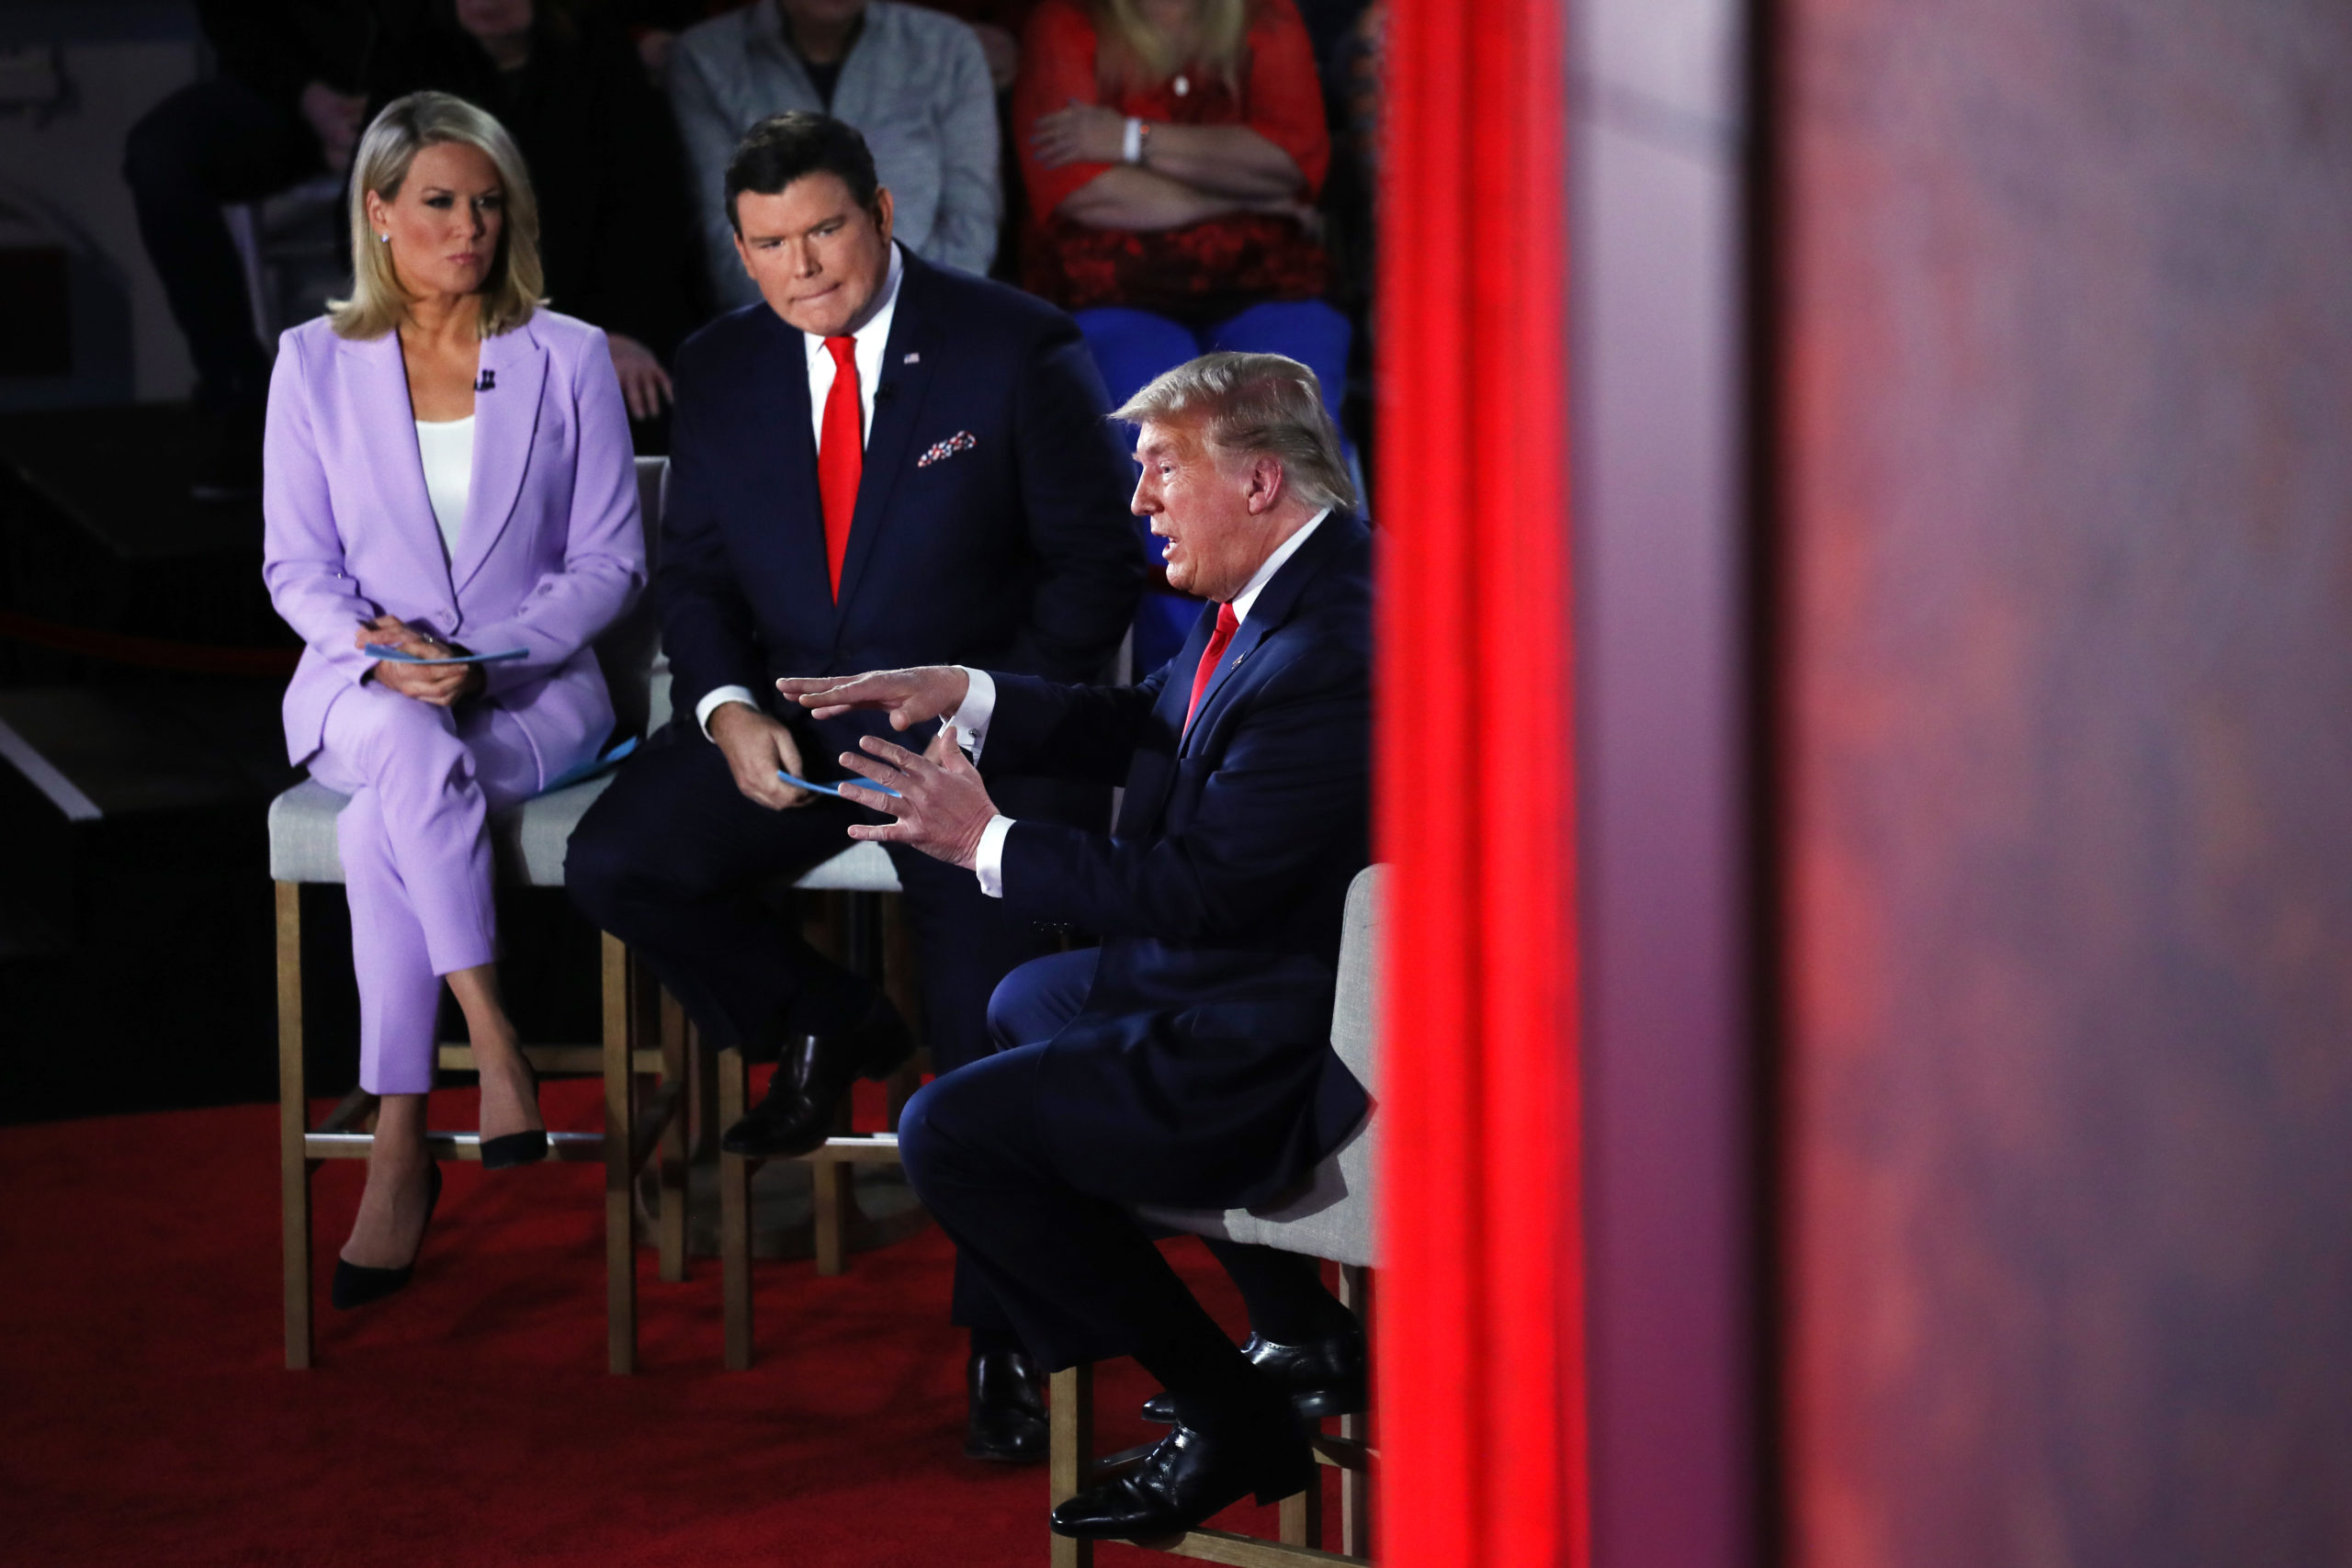 President Donald Trump participates in a Fox News Town Hall event with moderators Bret Baier and Martha MacCallum on March 05, 2020 in Scranton, Pennsylvania. Among other topics, President Trump discussed his administration's response to the Coronavirus and the economy. (Photo by Spencer Platt/Getty Images)